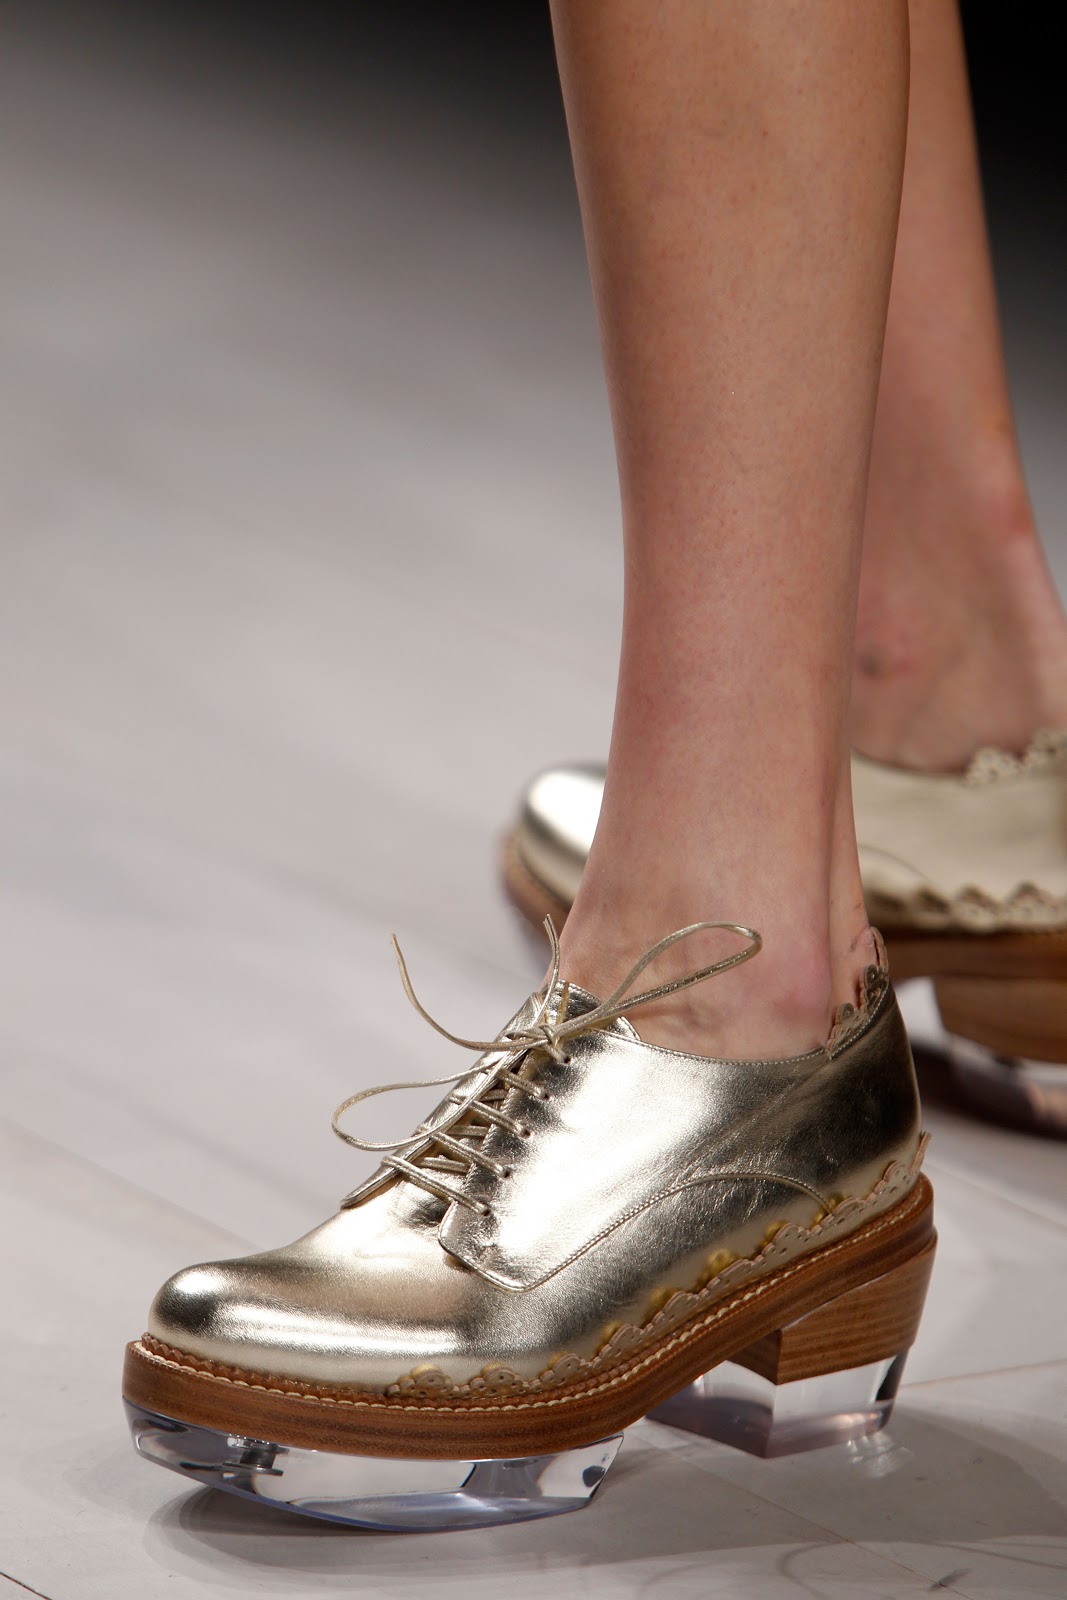 If we cannot be together: I love Simone Rocha shoes S/S13